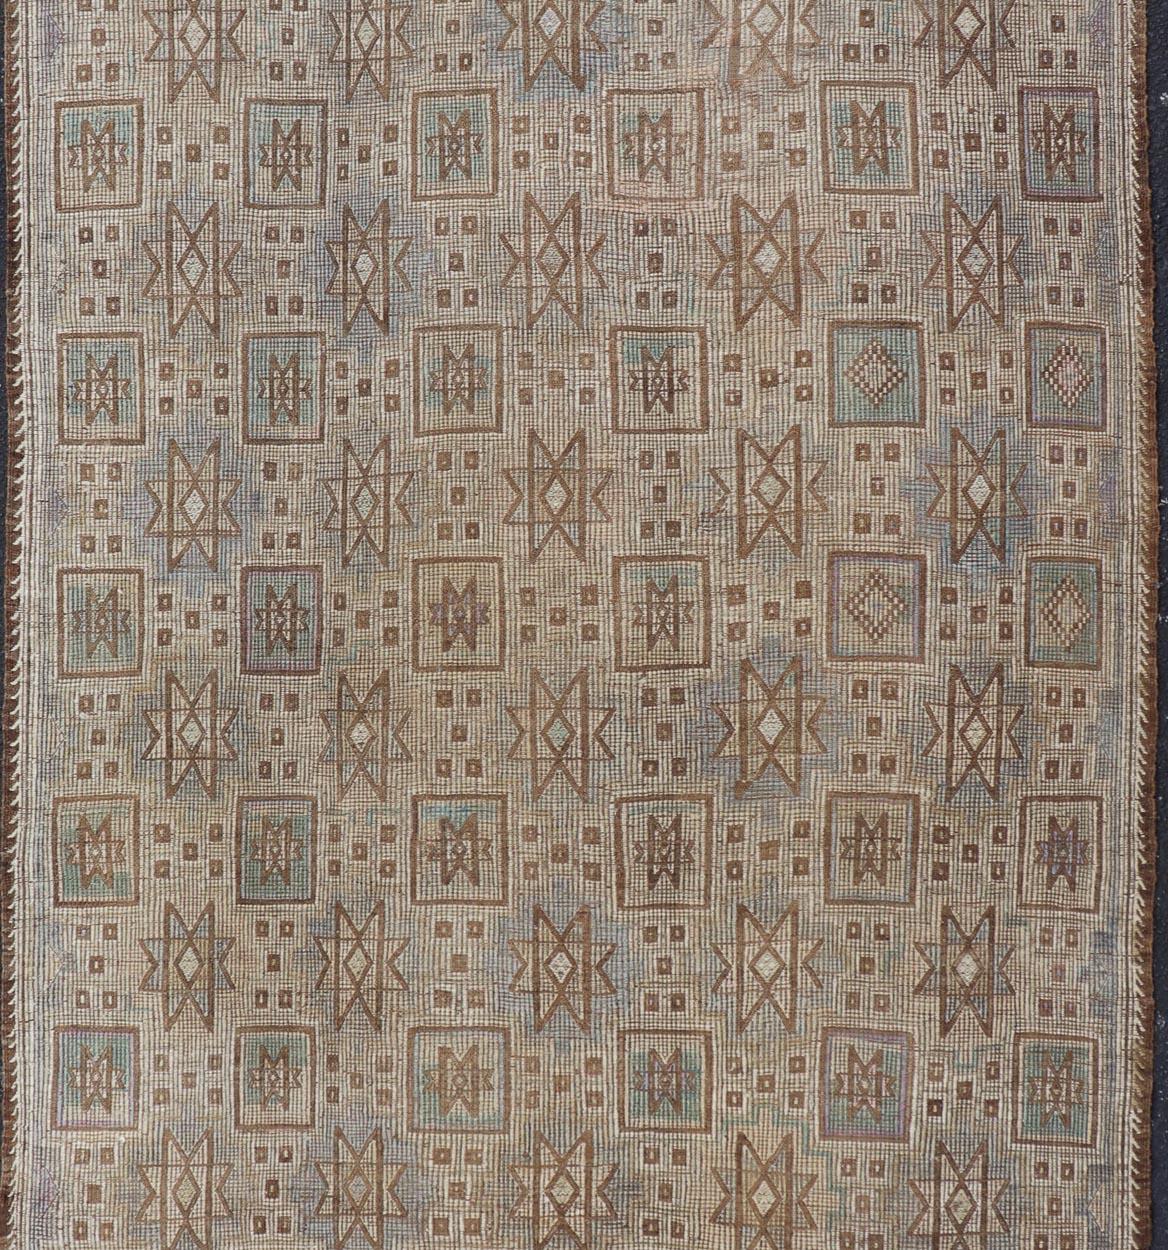 Vintage Turkish Embroidered Kilim in Light Green, Tan, and Hints of Lavender  For Sale 1